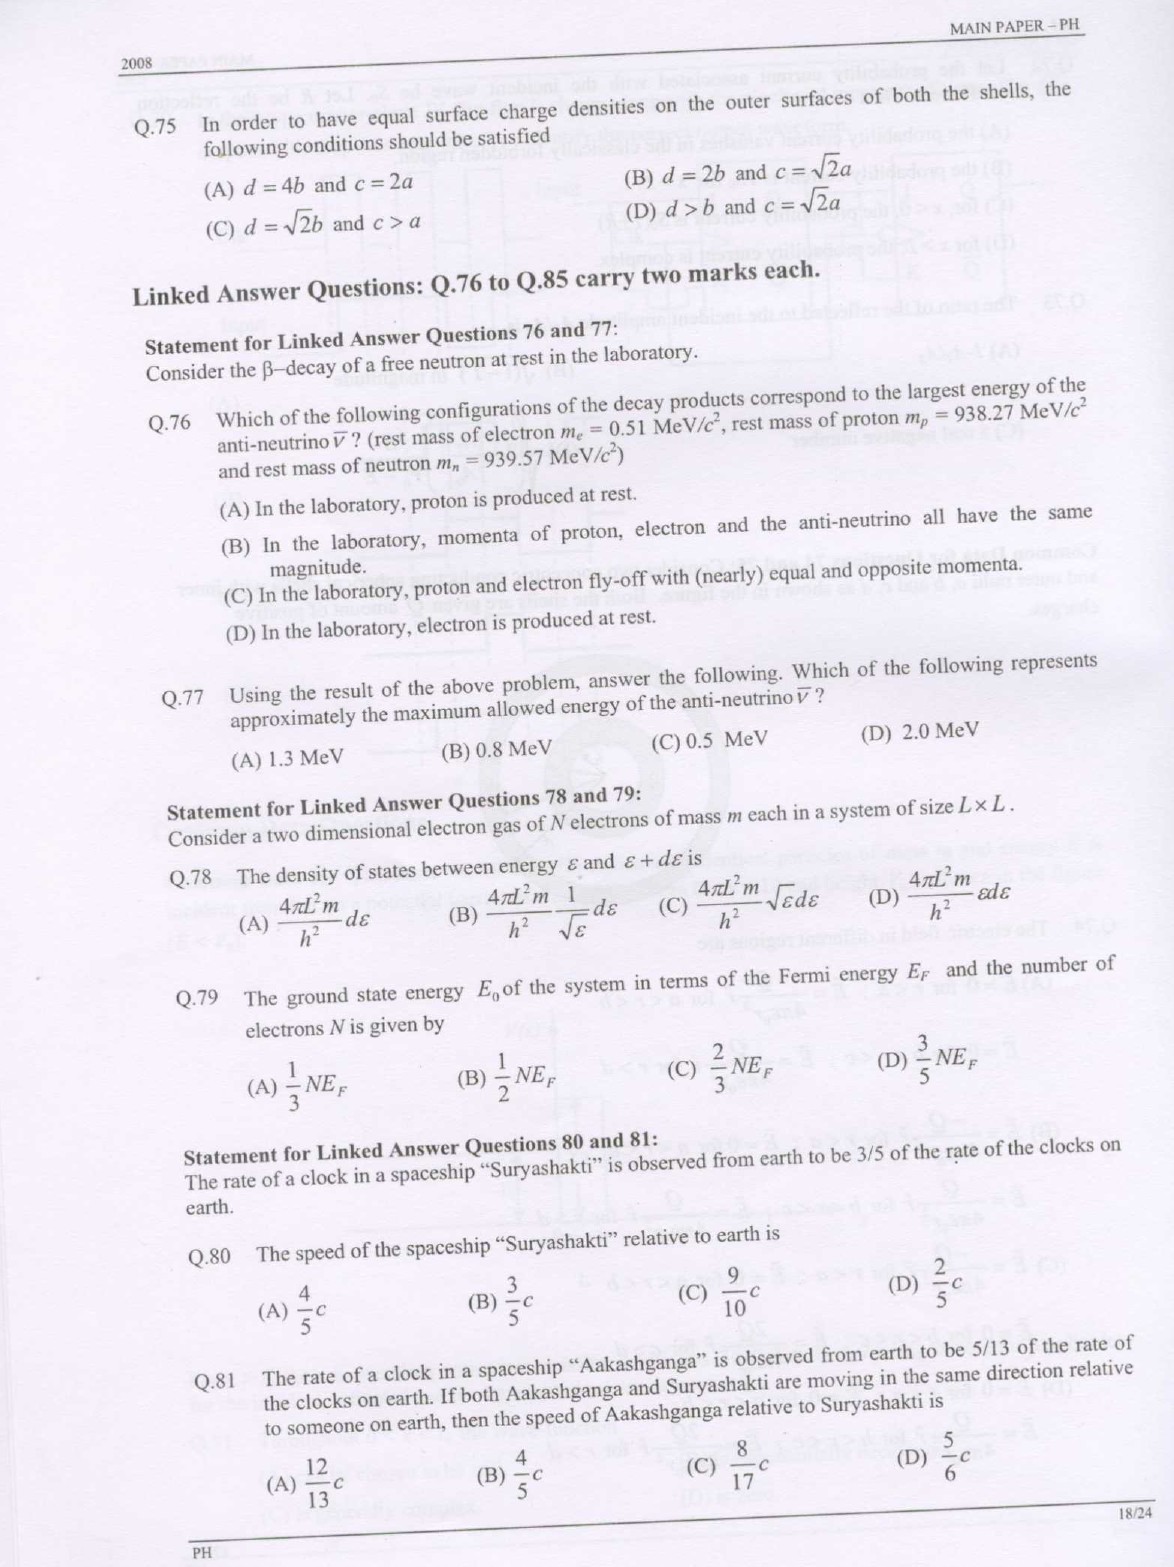 GATE Exam Question Paper 2008 Physics 18